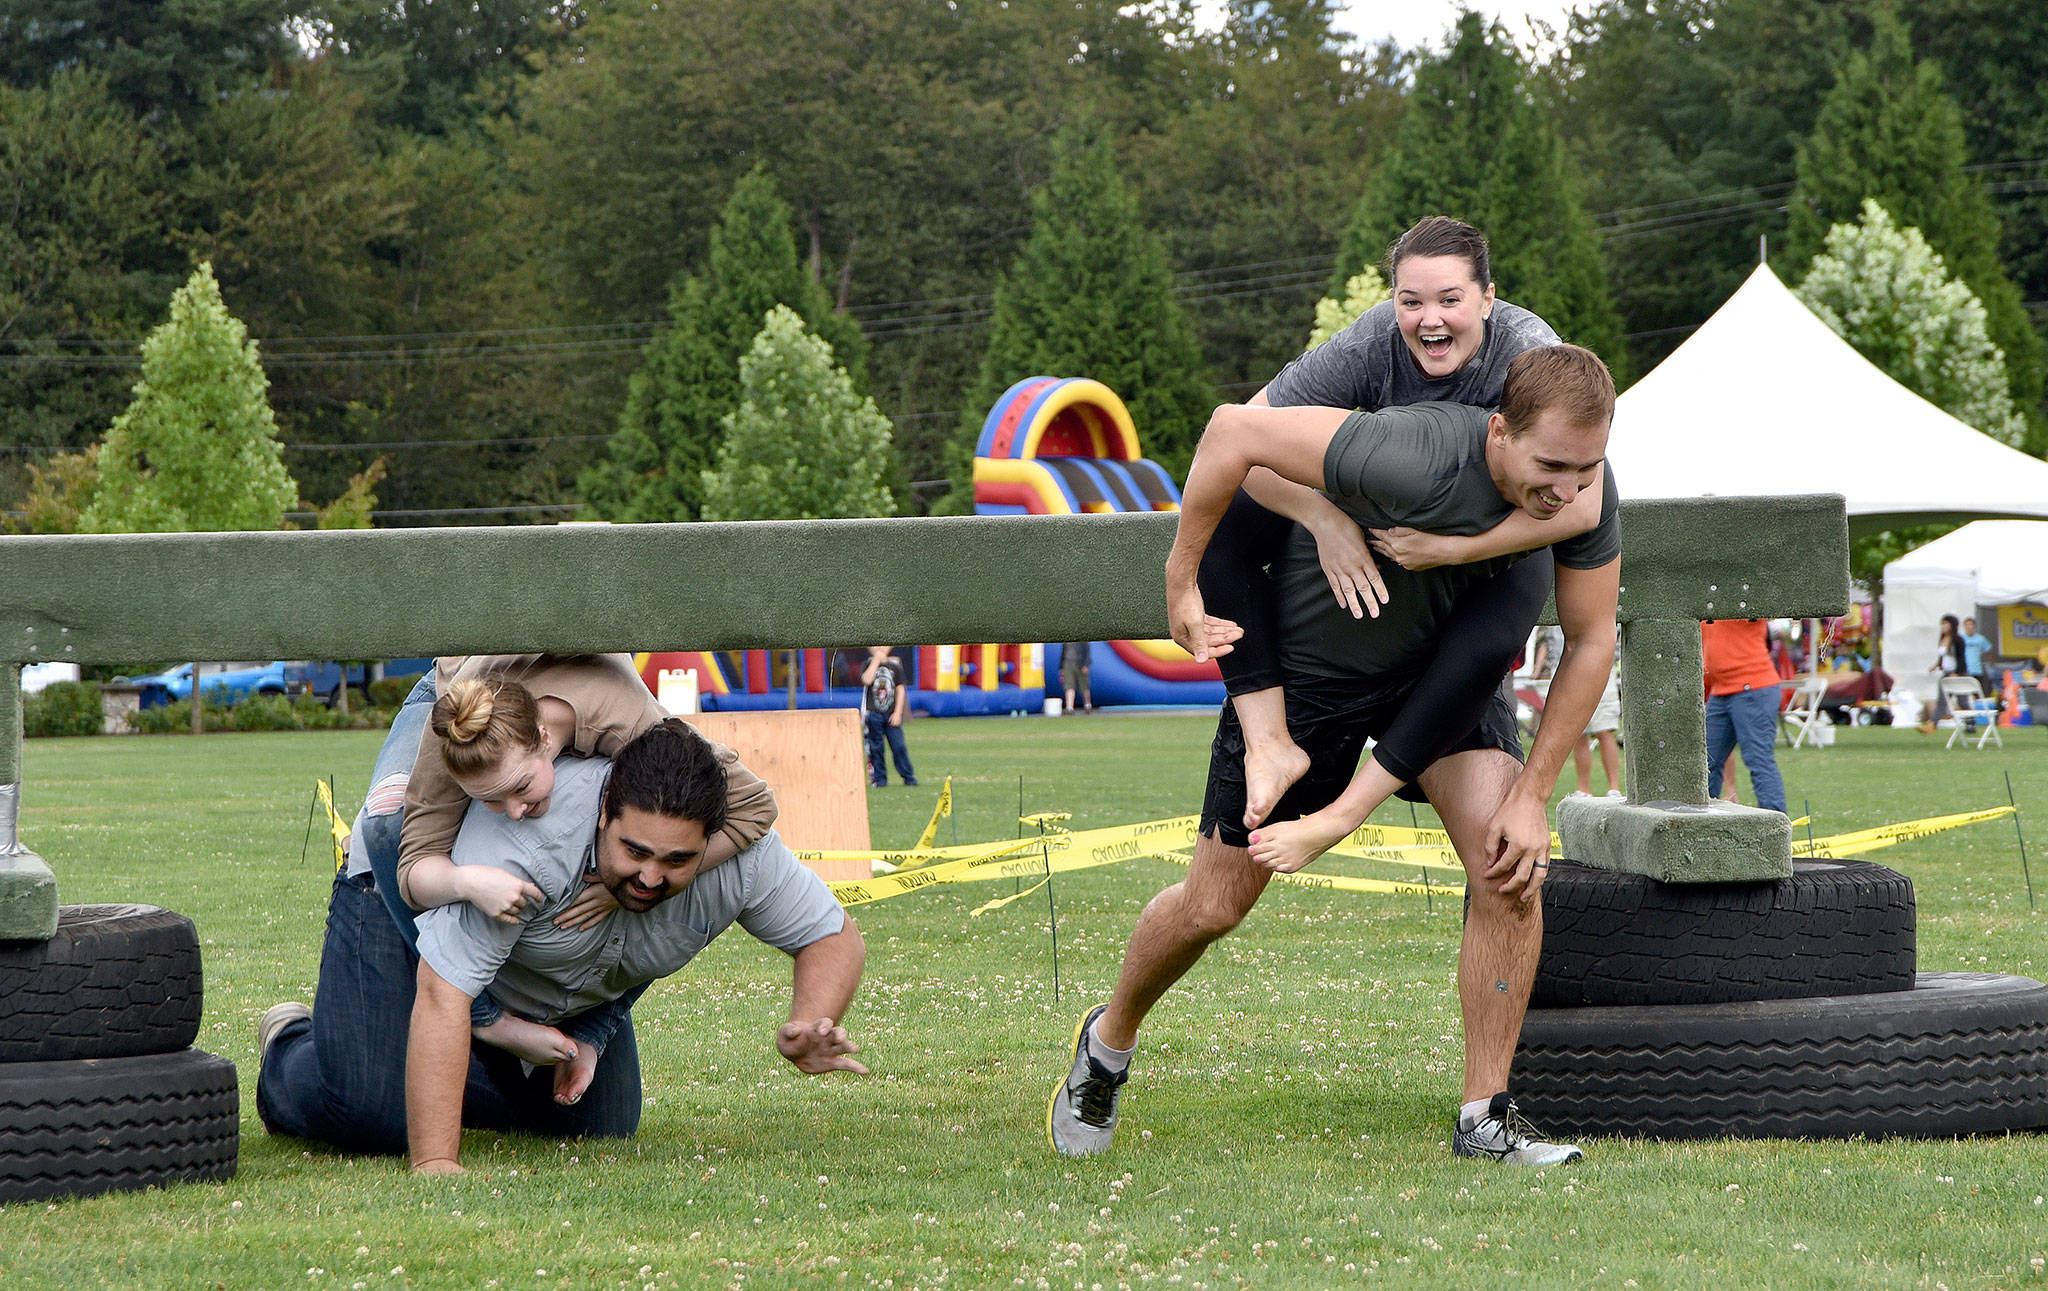 Chris and Jamie Teteak of North Bend smile hugely as they clear an obstacle, pursued by Alex Brewer and Lilly Knotts of Snoqualmie, in Sunday’s wife-carrying contest.                                (Carol Ladwig/Staff Photo)